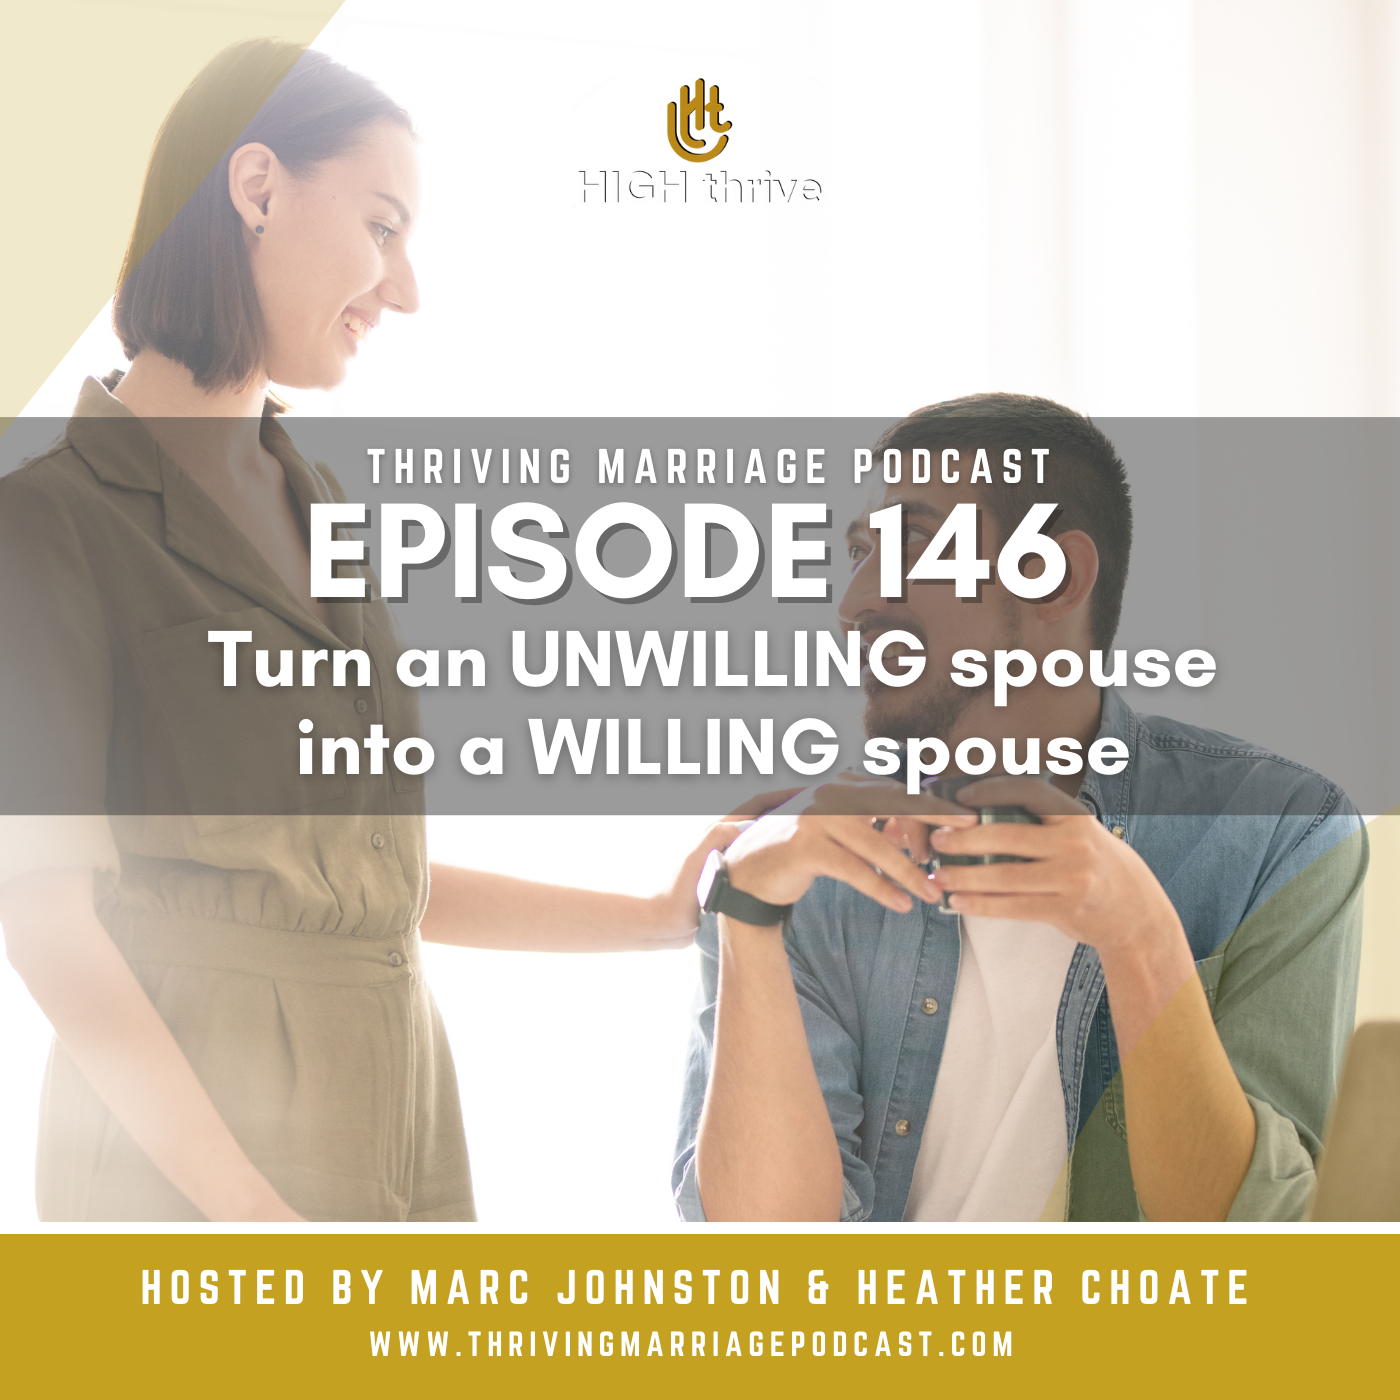 Episode 146: Turn an UNWILLING spouse into a WILLING spouse